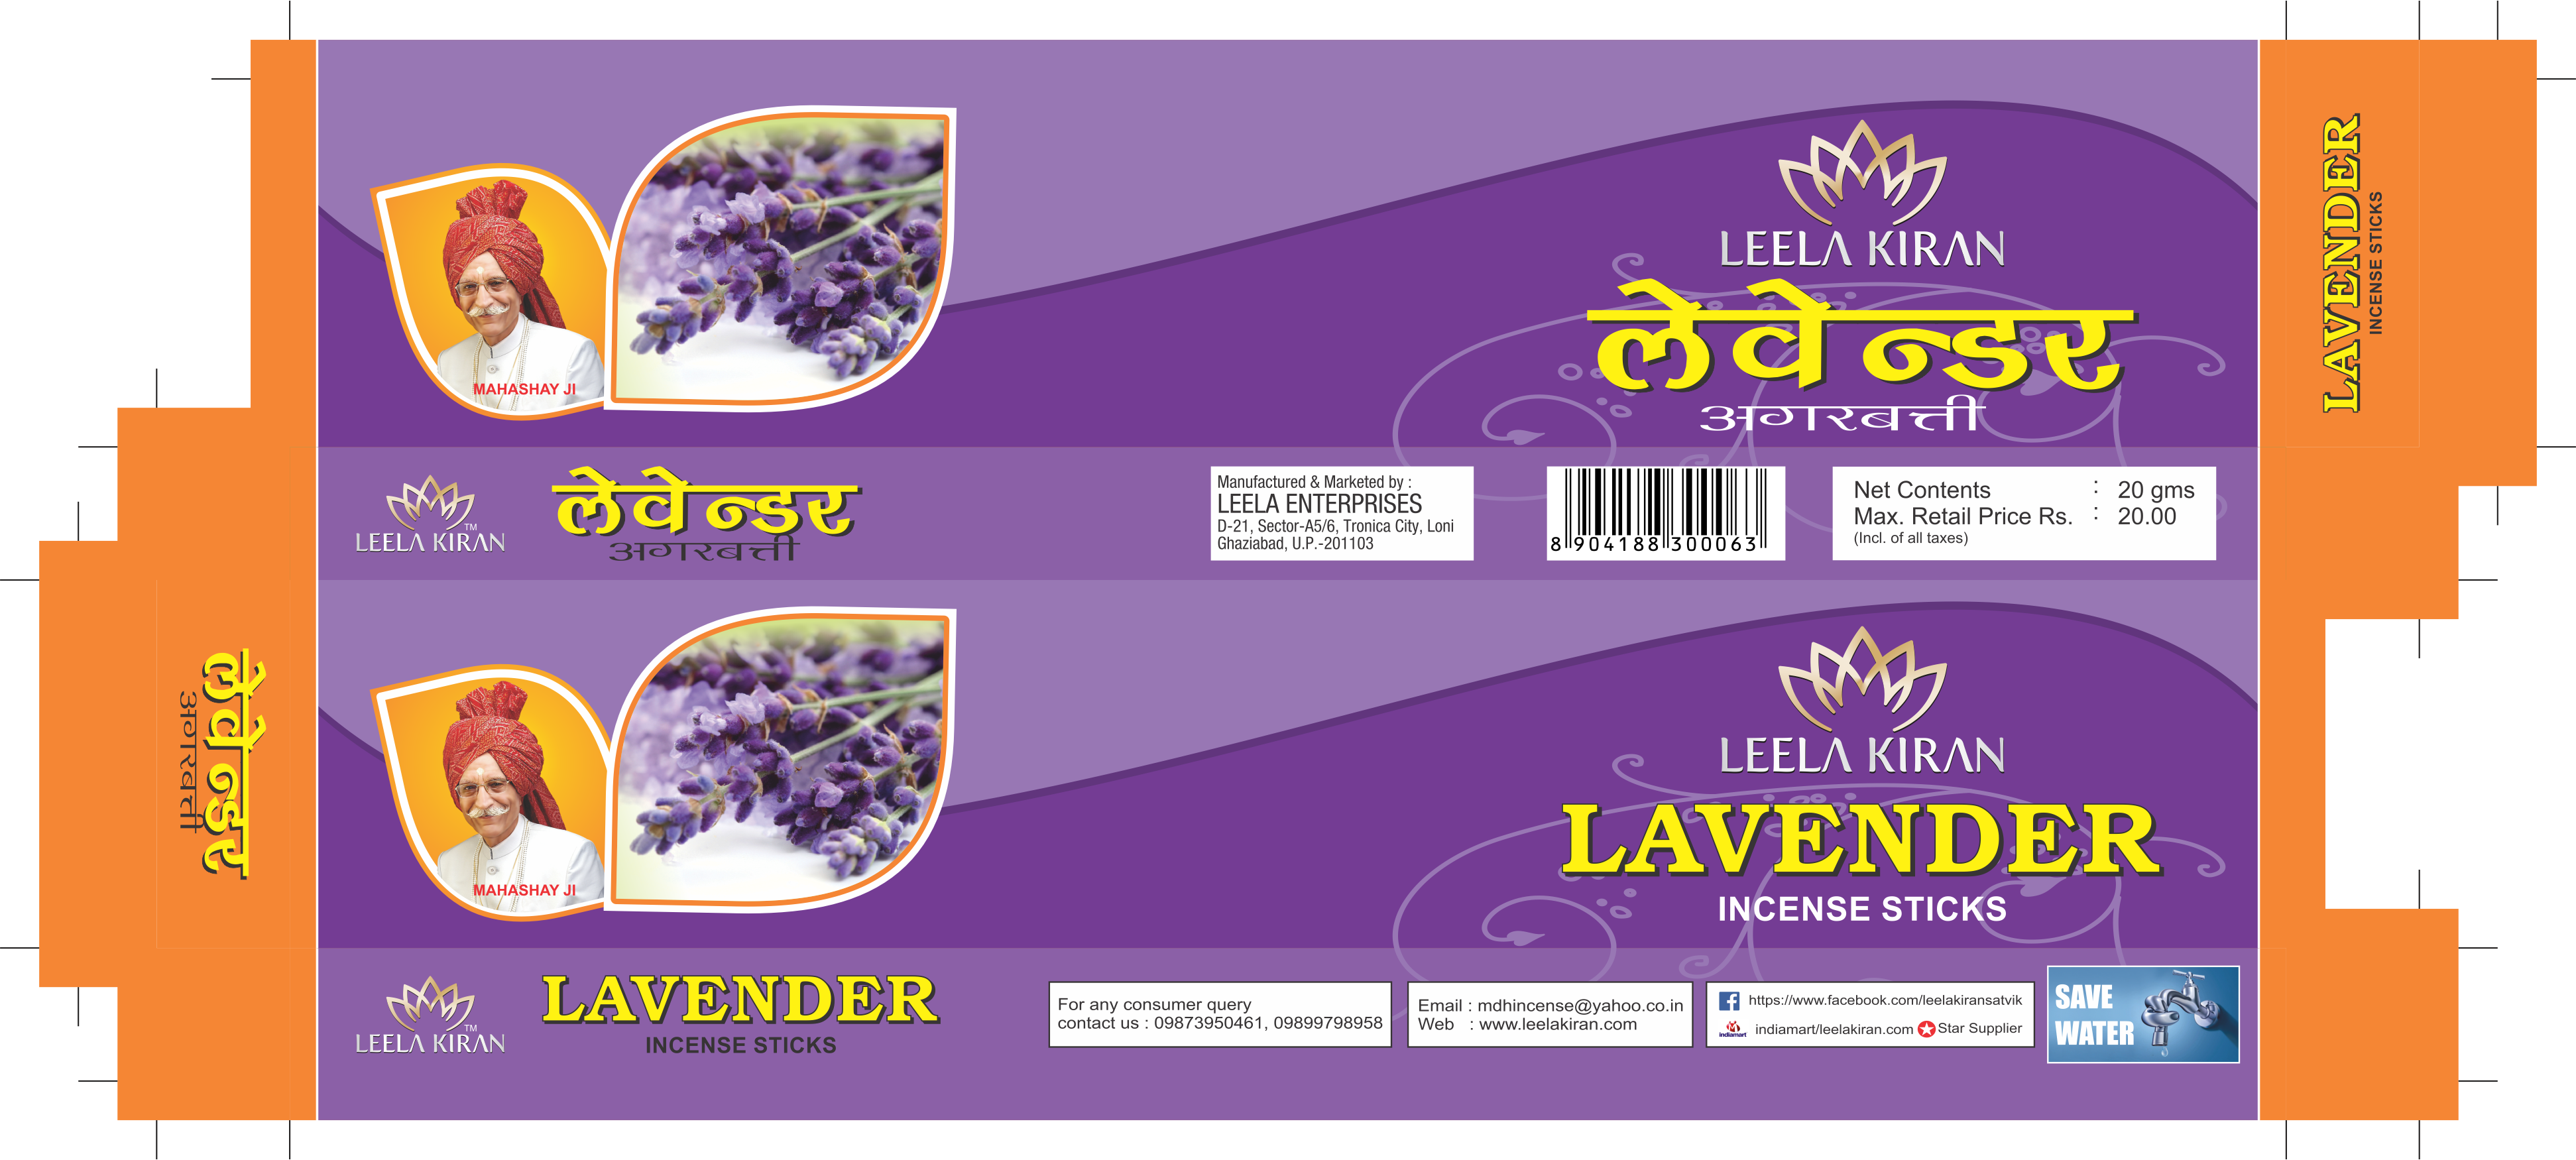 A Purple Label With Yellow Text